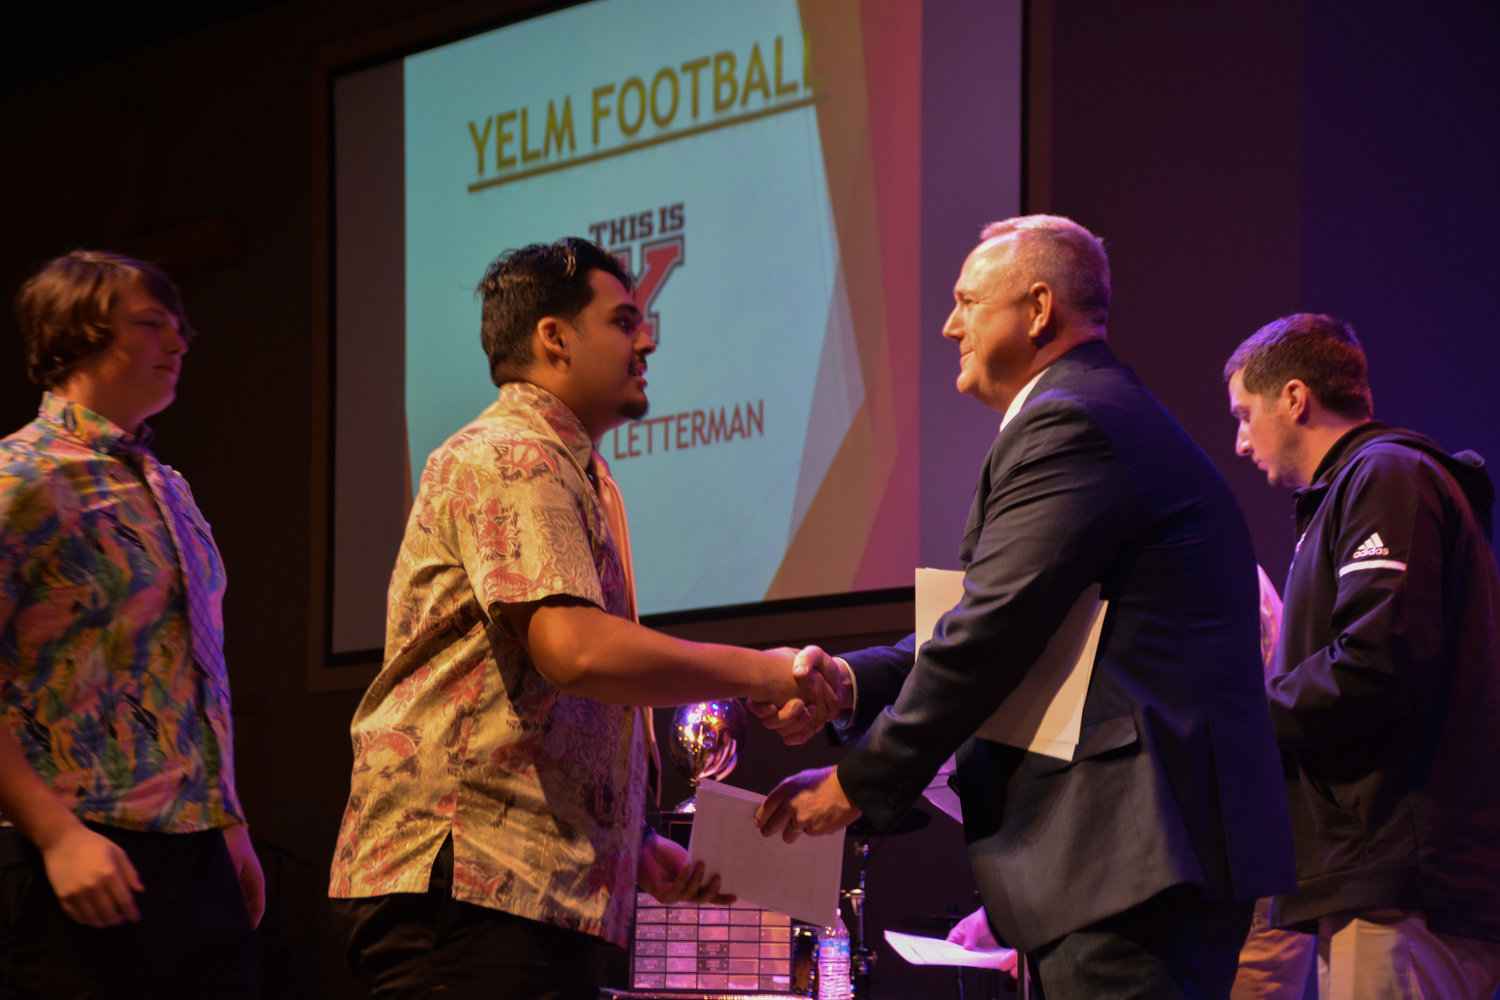 Junior offensive lineman Kyle Kaaiwela accepts his varsity letter from his position coach Brian Foote, while lineman Tyler Blevins waits to accept his.